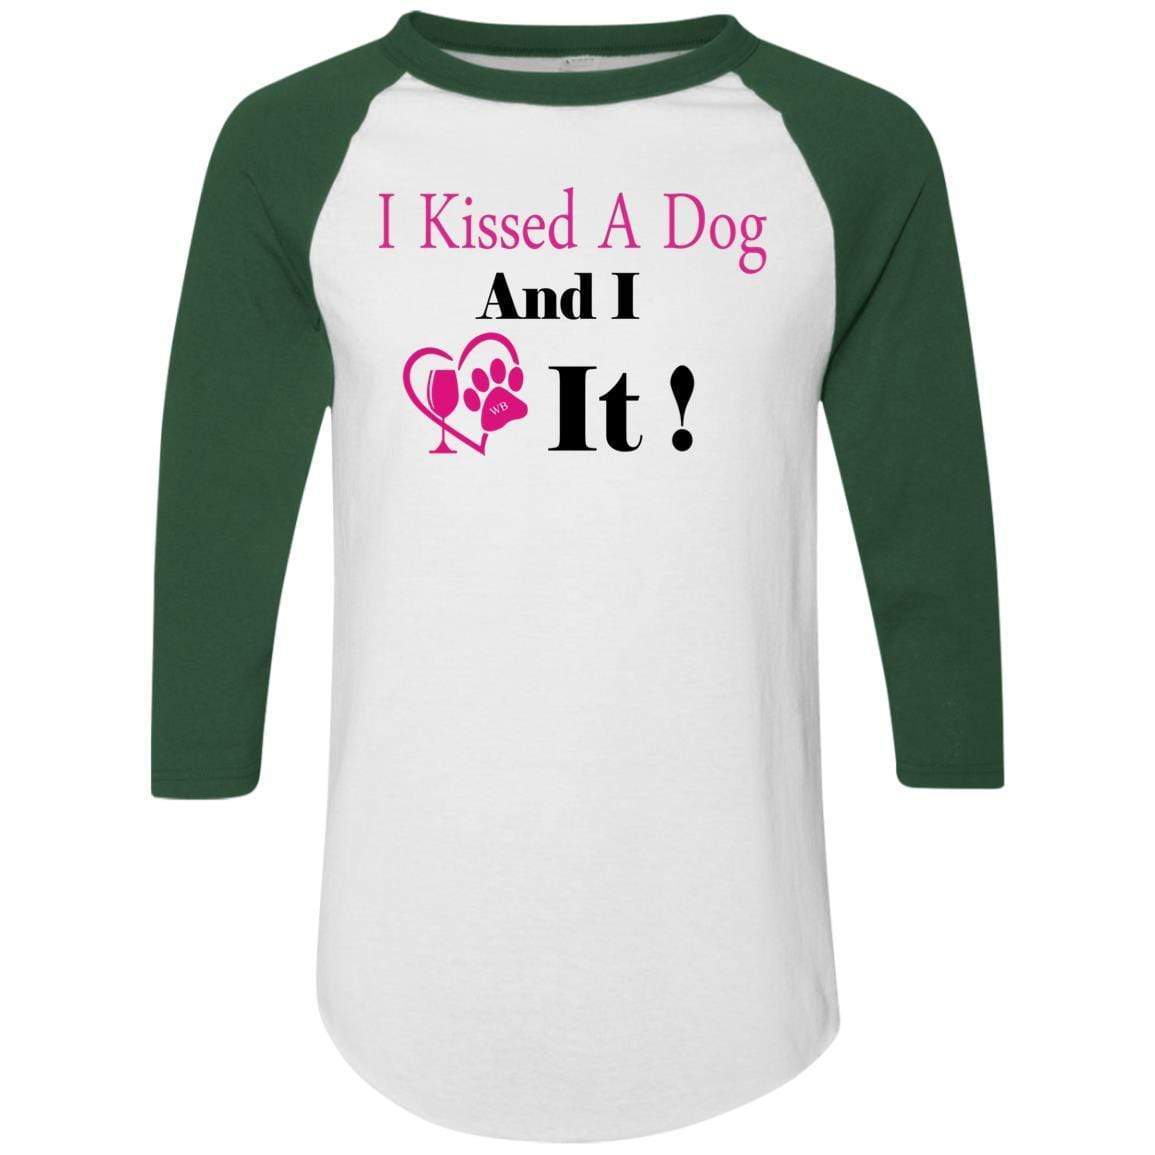 T-Shirts White/Dark Green / S WineyBitches.co "I Kissed A Dog And I Loved It:" Colorblock Raglan Jersey WineyBitchesCo